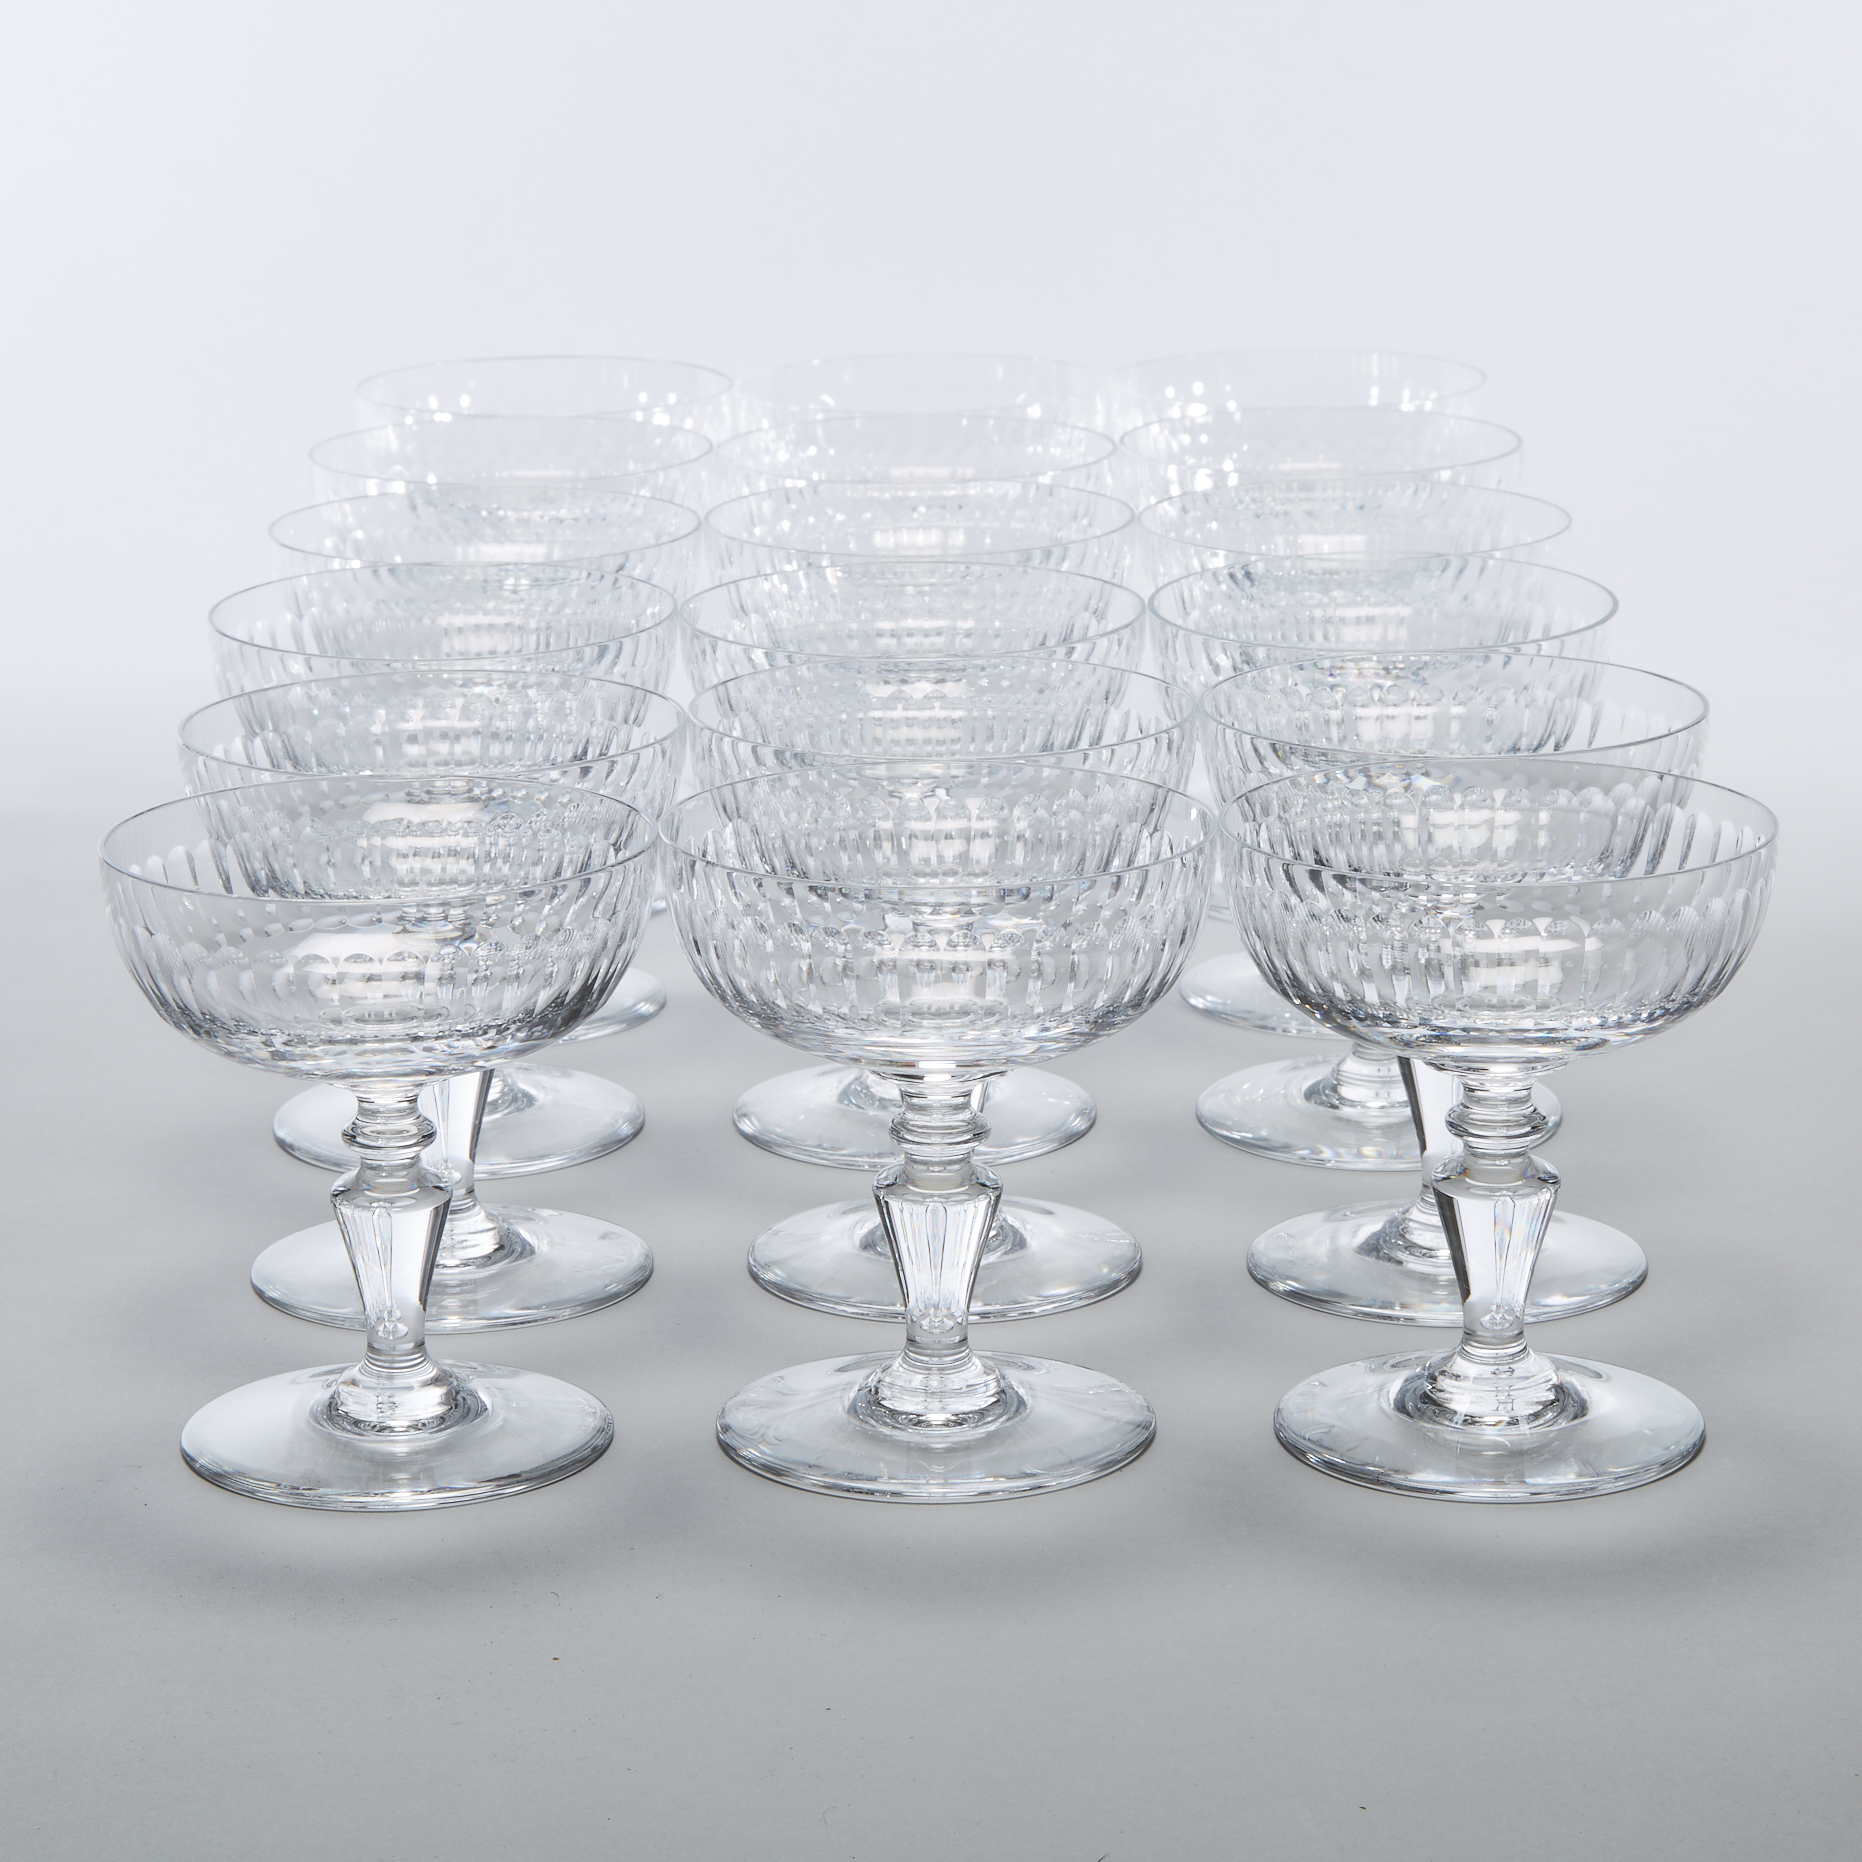 Eighteen Baccarat 'Renaissance' Cut Glass Champagne Coupes, 20th century